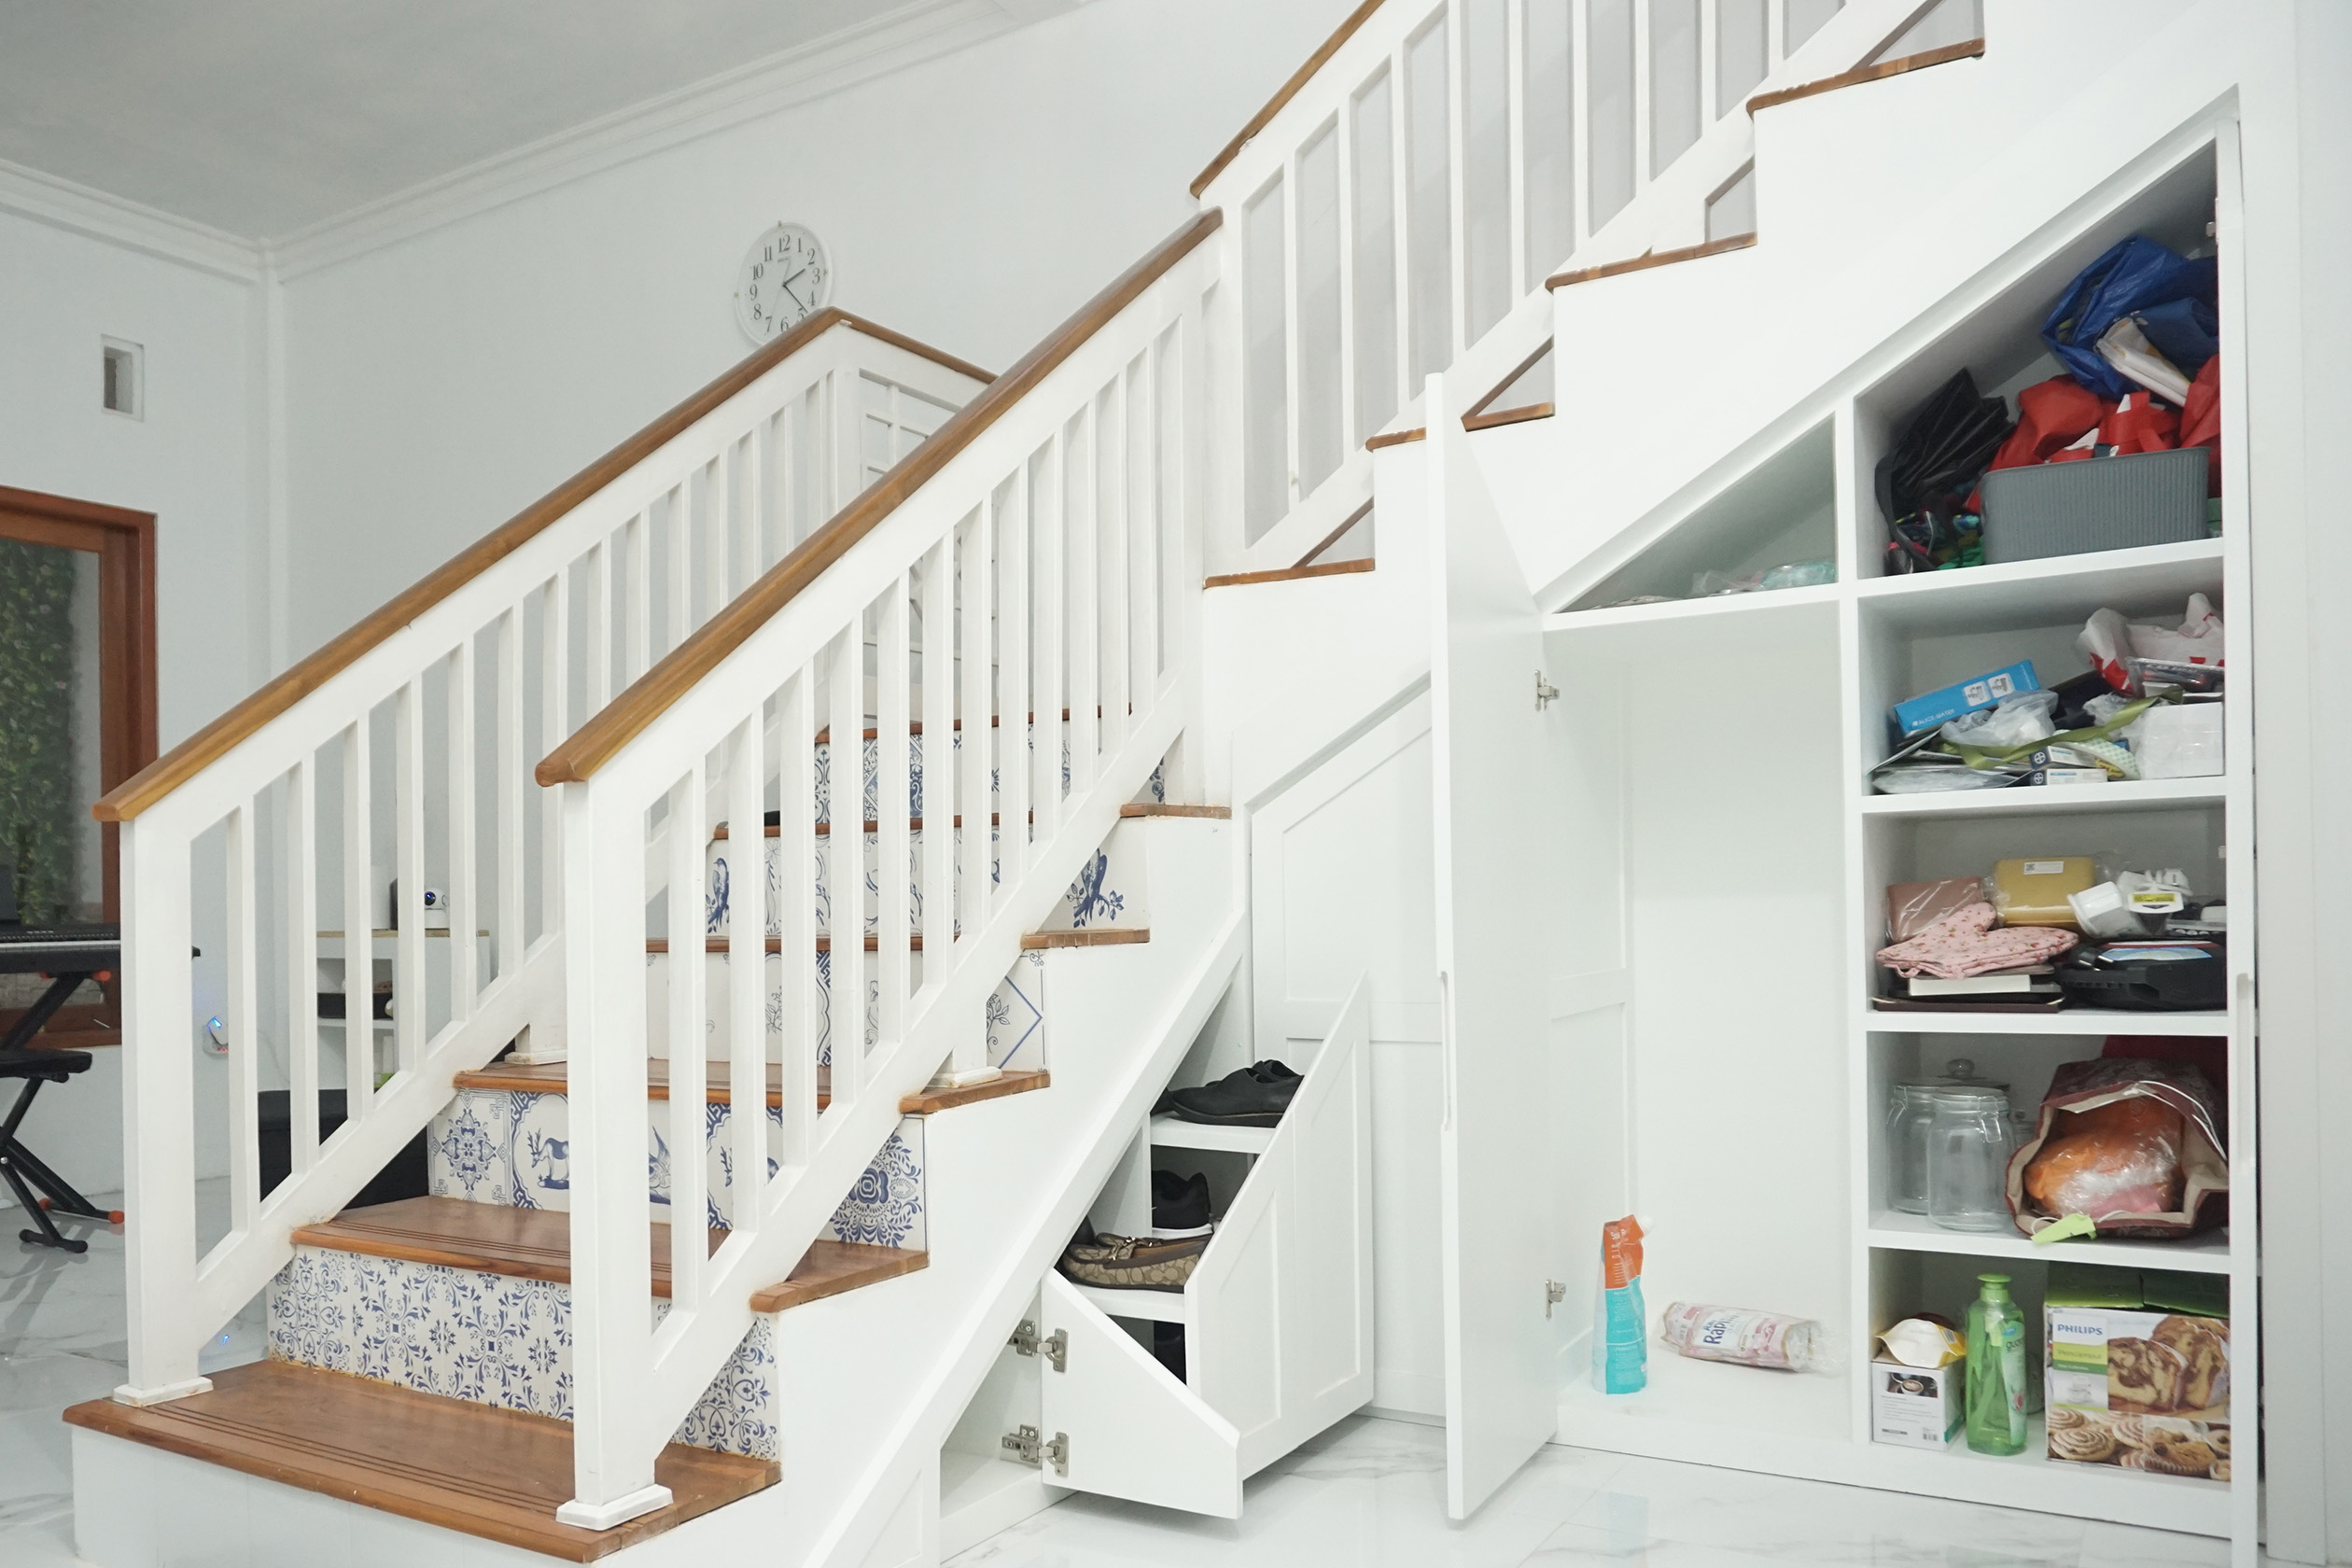 https://www.21oak.com/wp-content/uploads/sites/7/2021/12/staircase-with-under-stair-storage.jpg?p=1